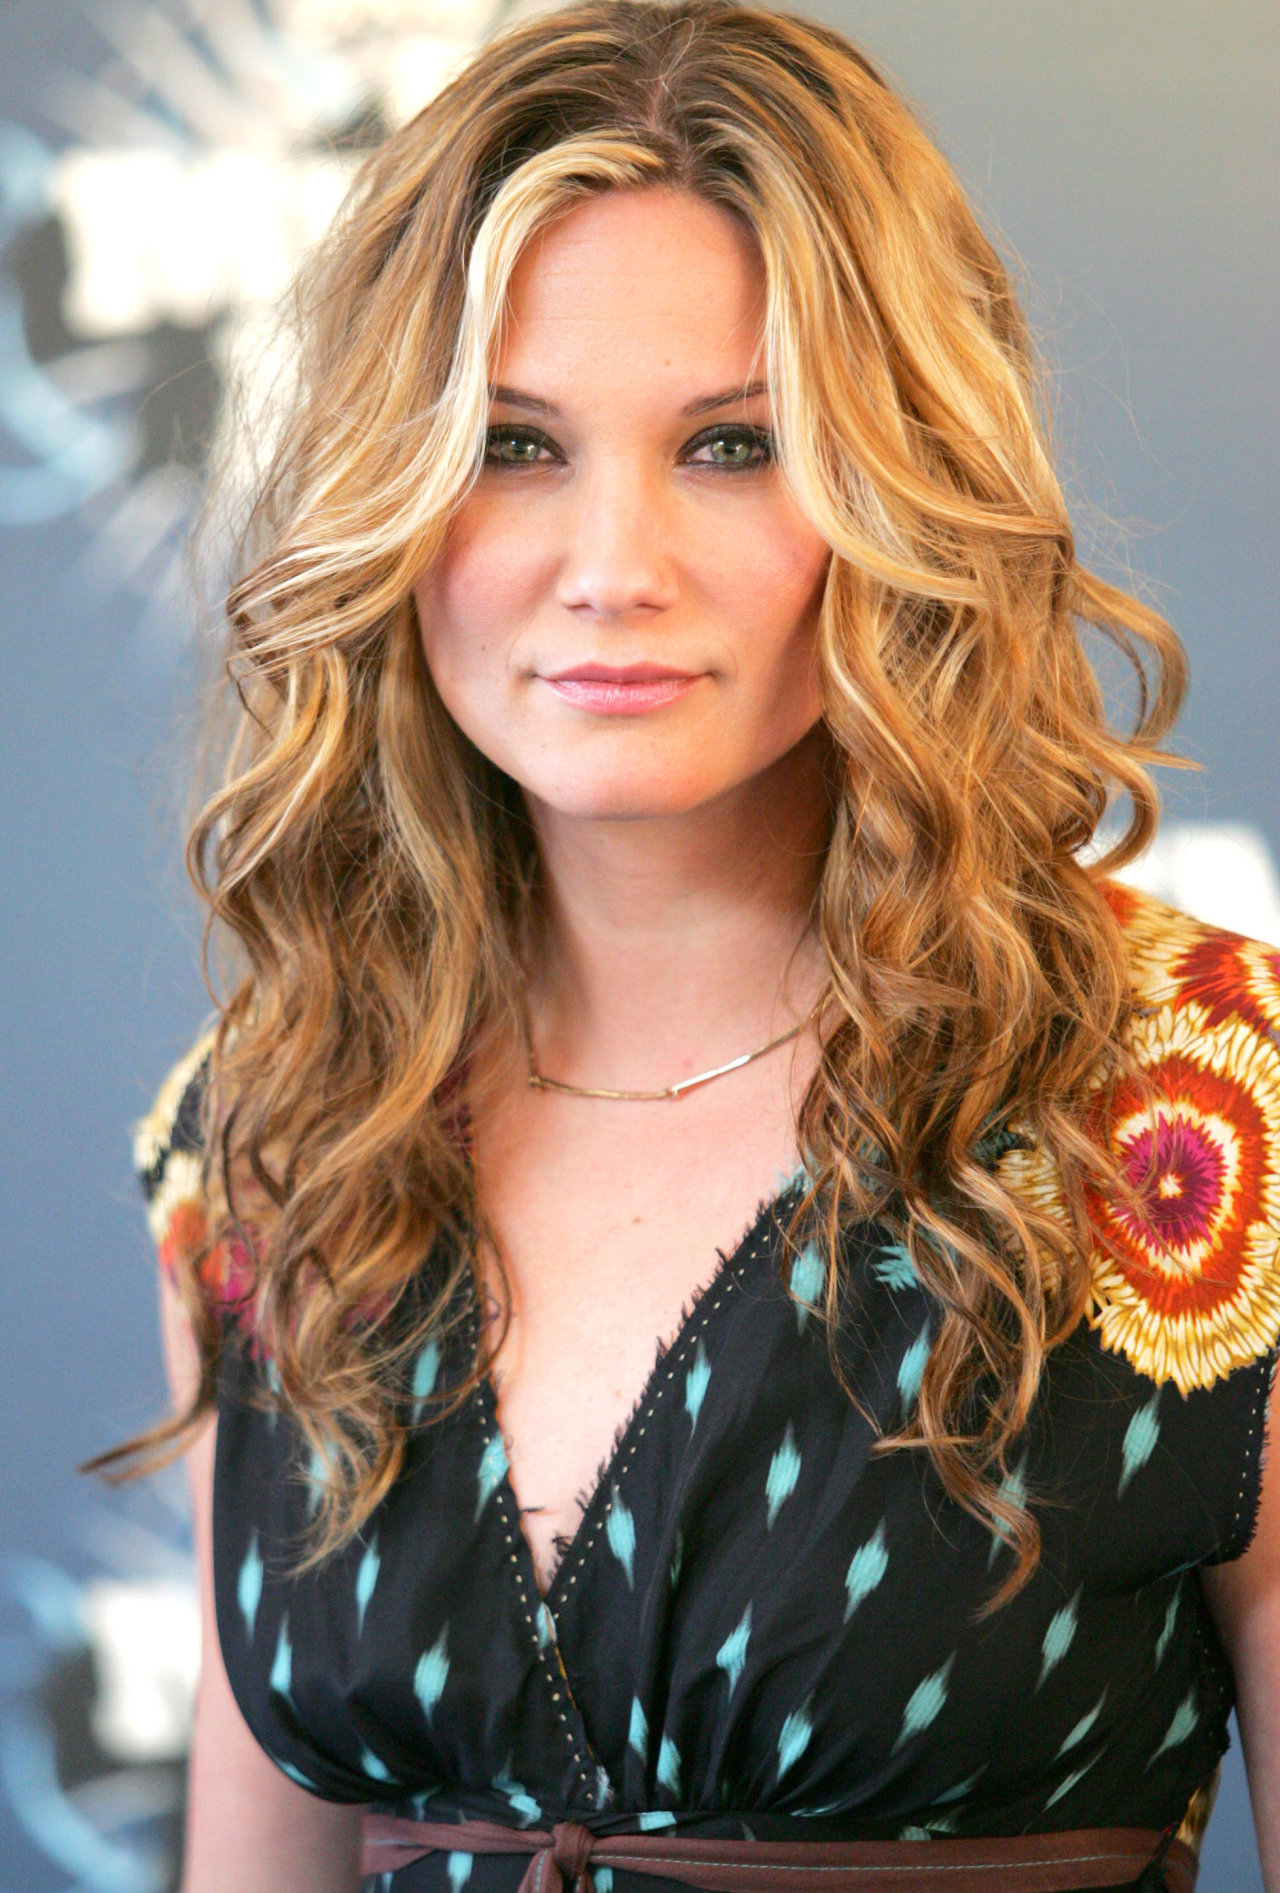 Sugarlands Jennifer Nettles playing with Fire